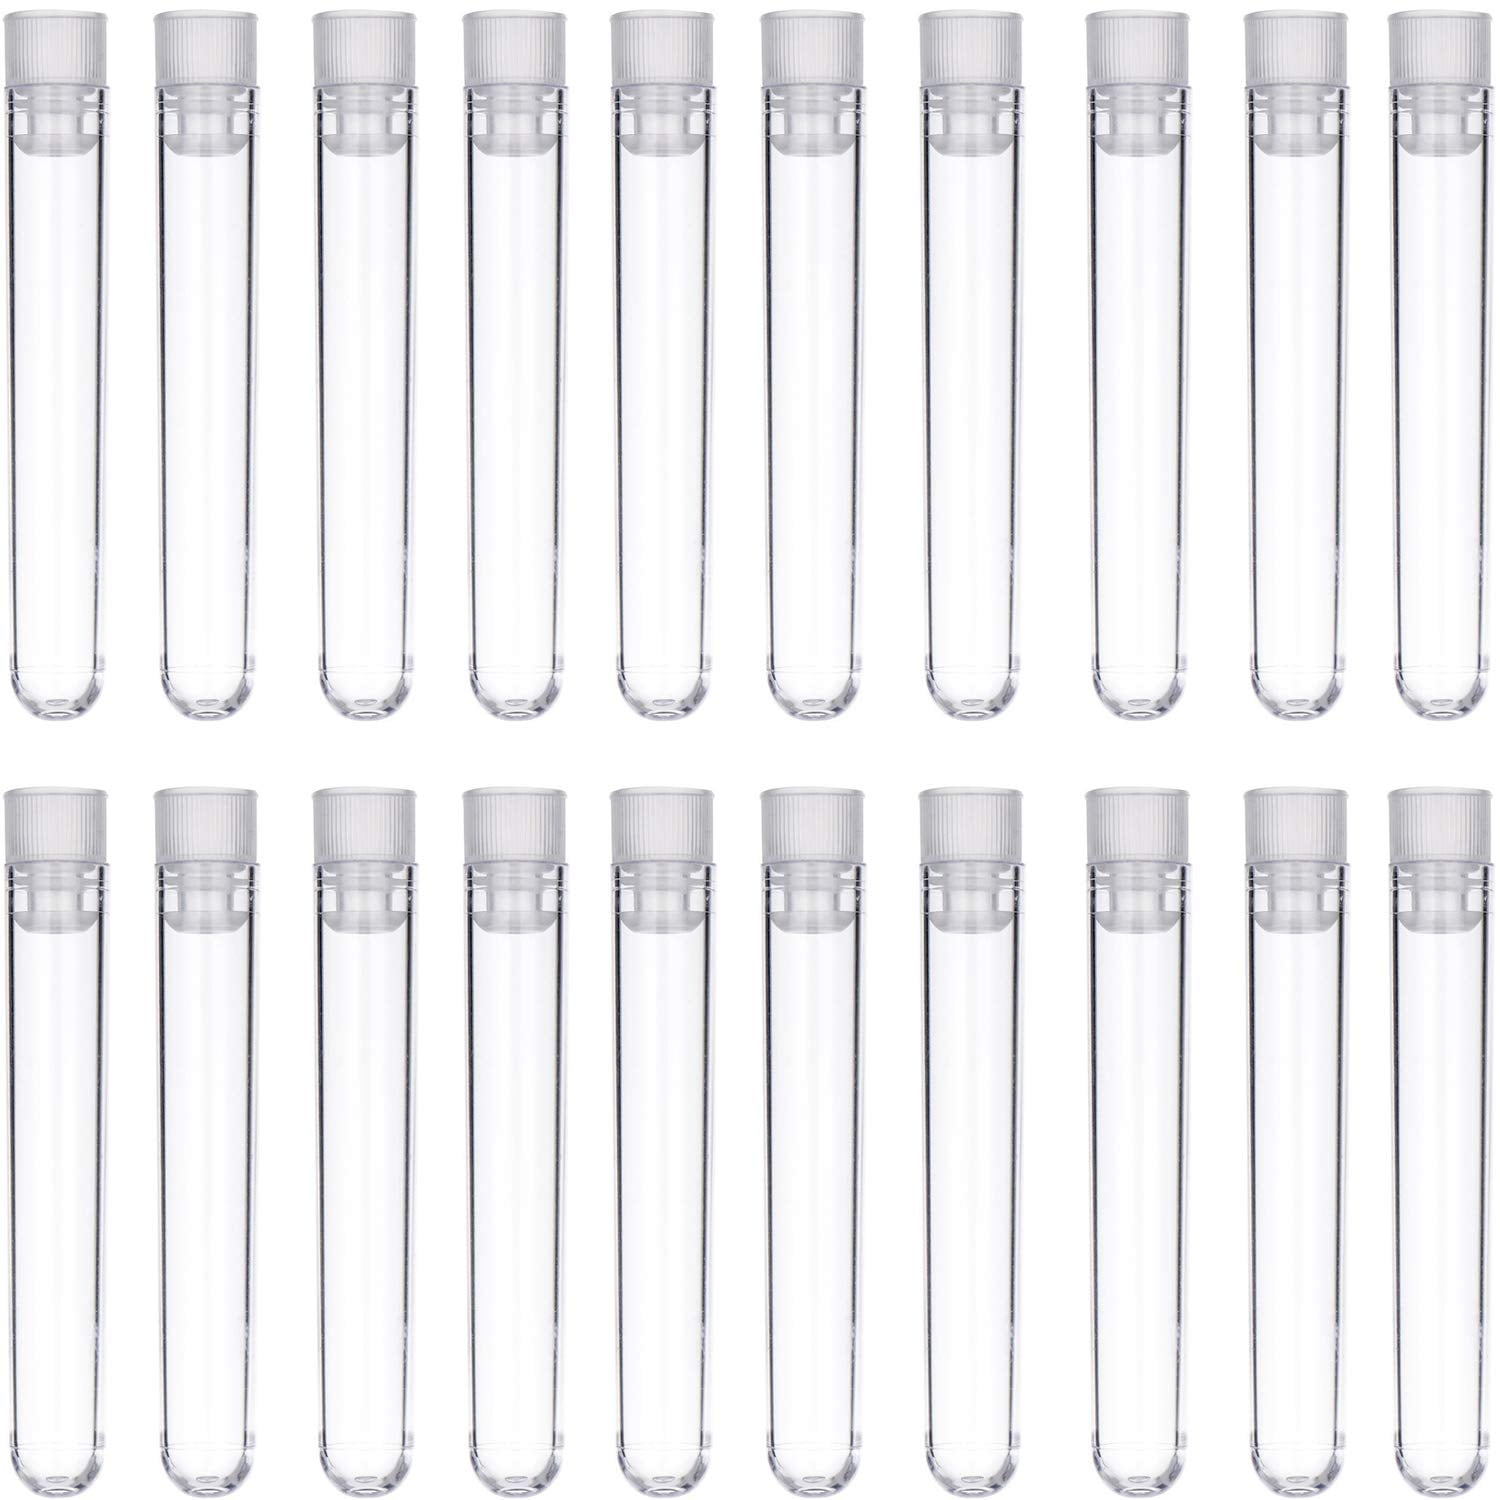 Needle Storage Bottles 12 by 75 mm with Push Caps 50 Pcs 5 ml Clear Plastic Test Tubes Red Caps